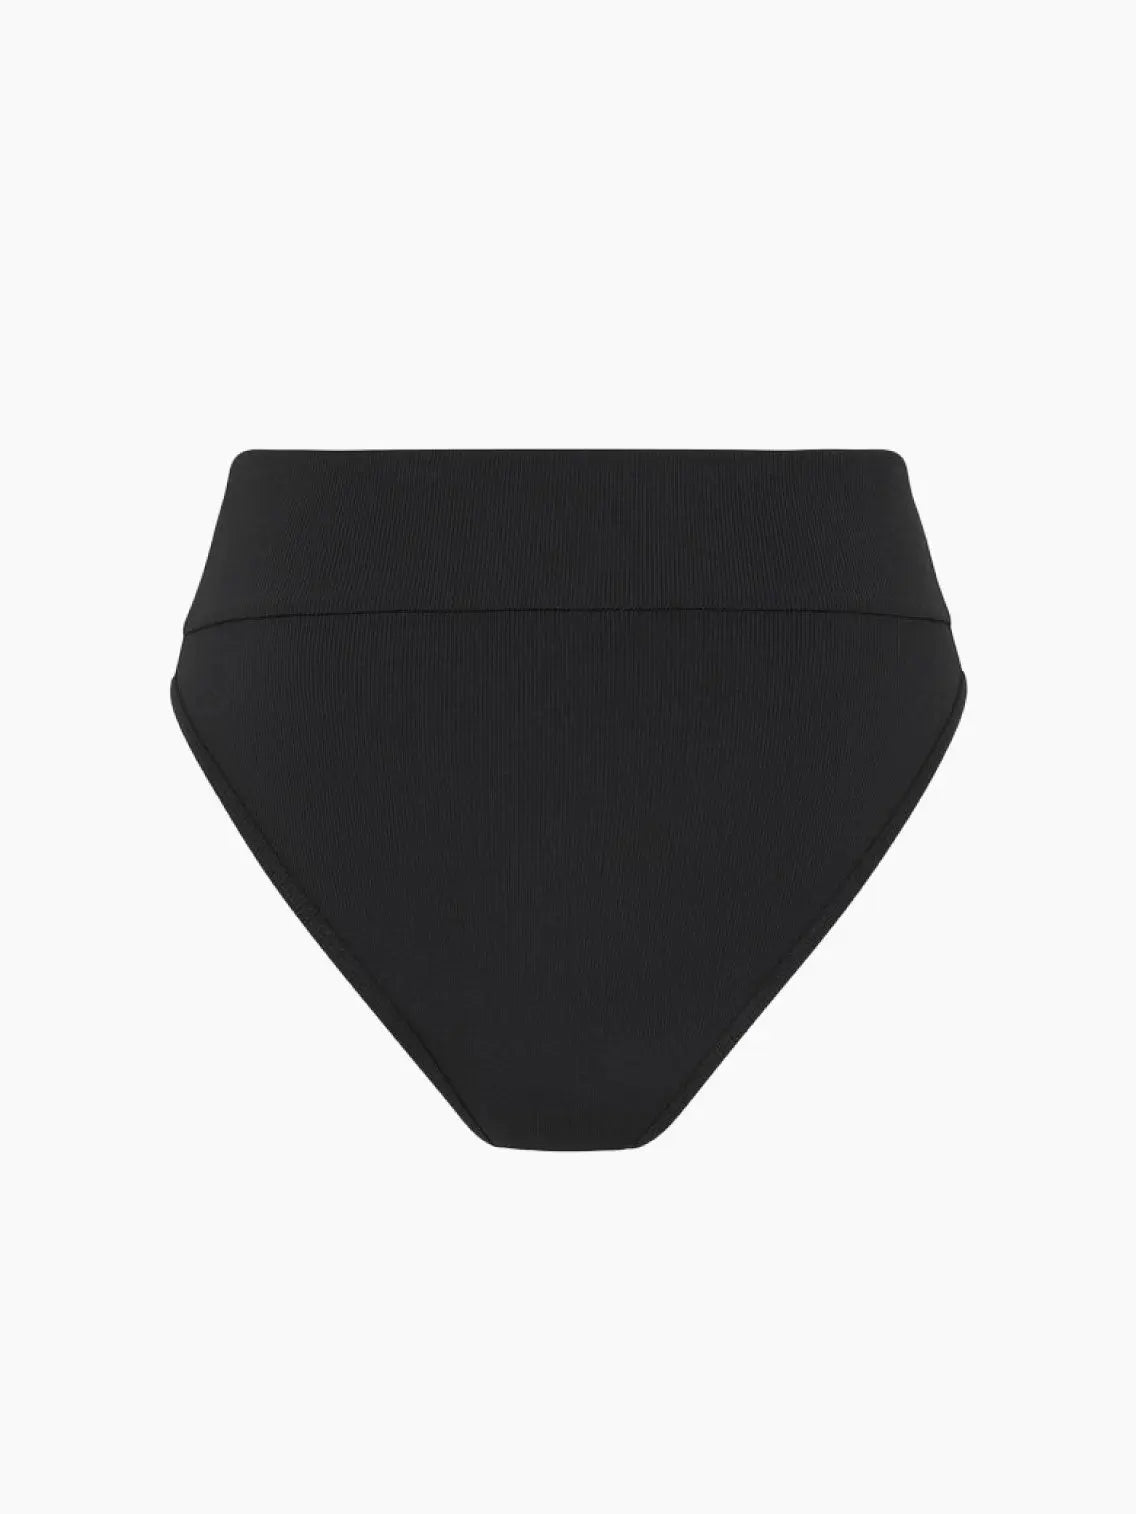 A pair of Black High Waist Brief from Innes Lauren displayed against a white background. The design features a simple, sleek silhouette with a smooth, stretchy fabric finish, providing full coverage and a classic swimwear look.